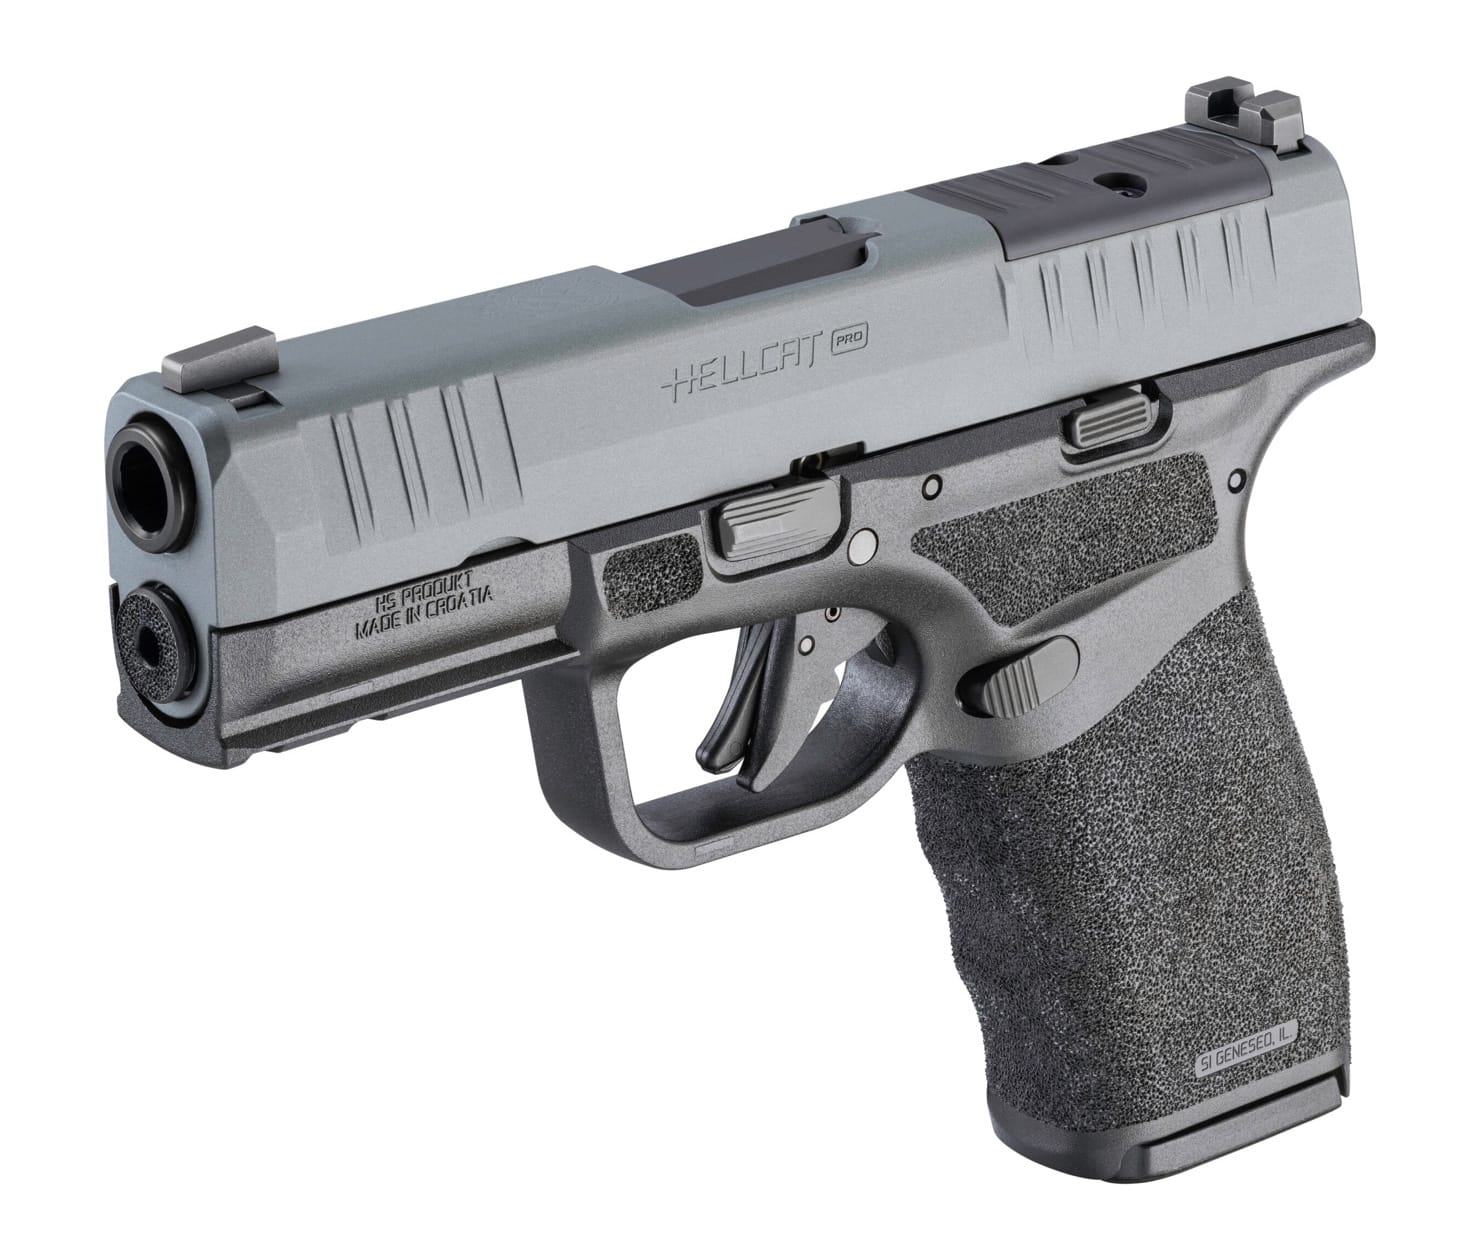 Shown here is the Springfield Armory Hellcat Pro with the Platinum Gray finish. This is an exclusive model available through Sports South.